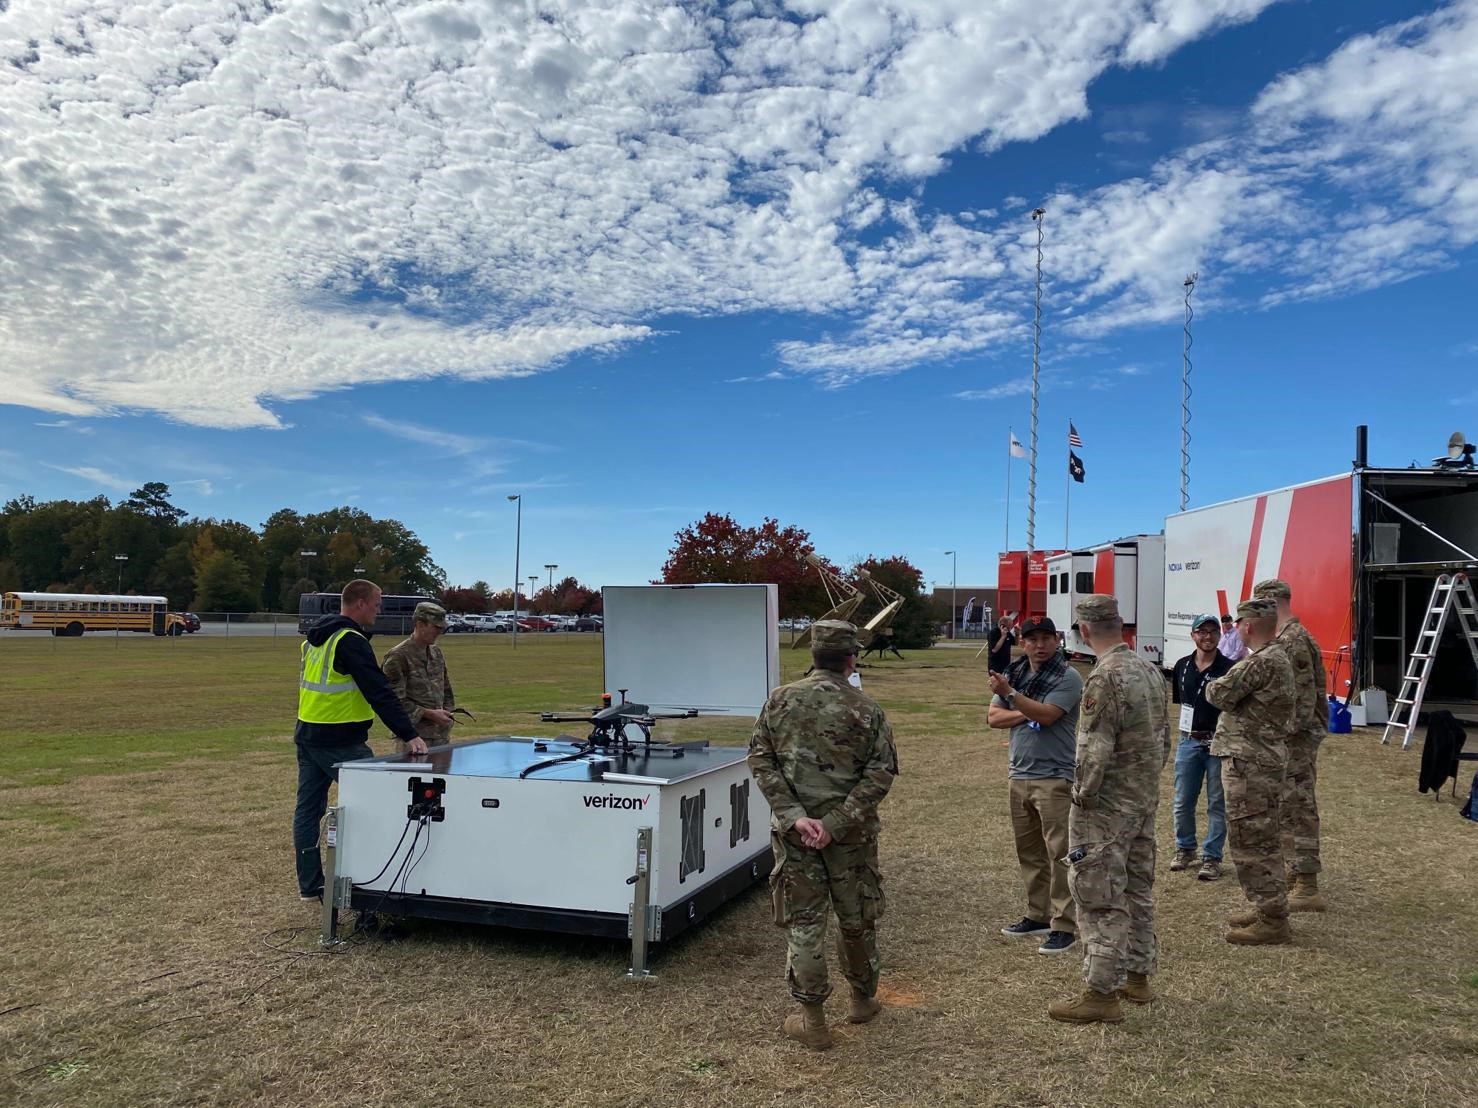 Military personnel get ready to watch an Asylon security drone takeoff.